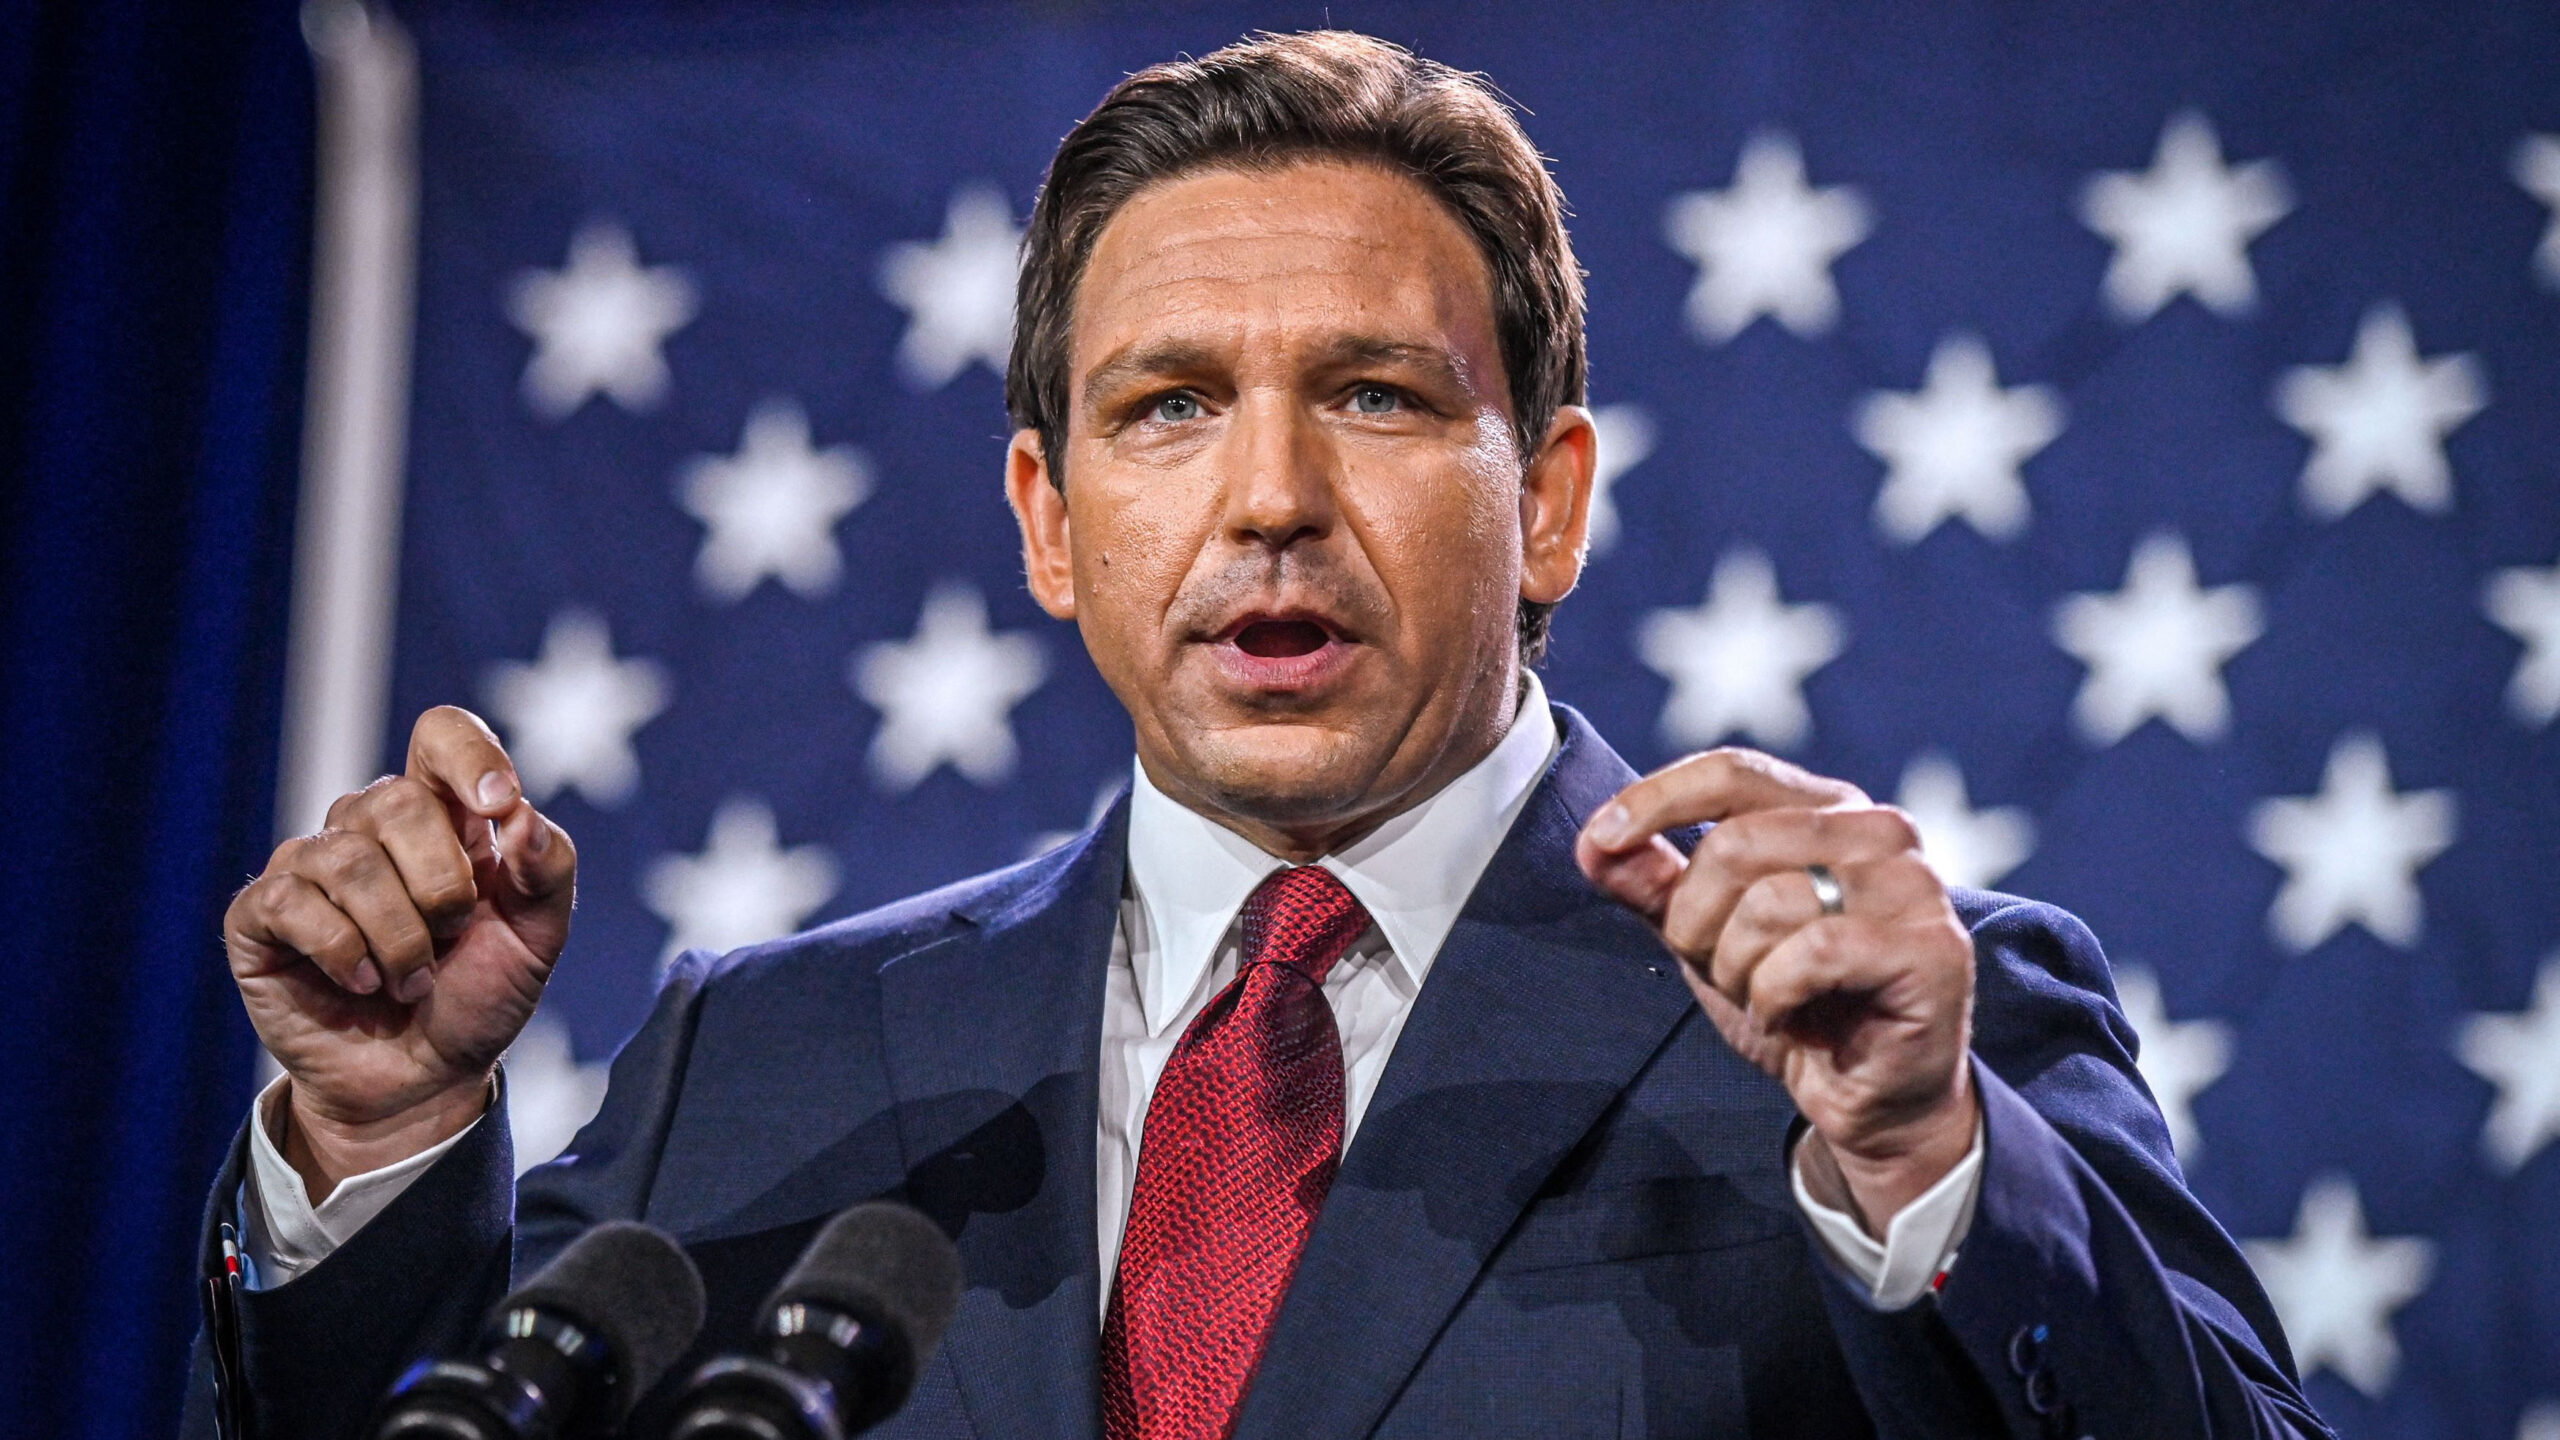 DeSantis Responds Directly To Trump’s Attacks On Florida’s Handling Of Pandemic